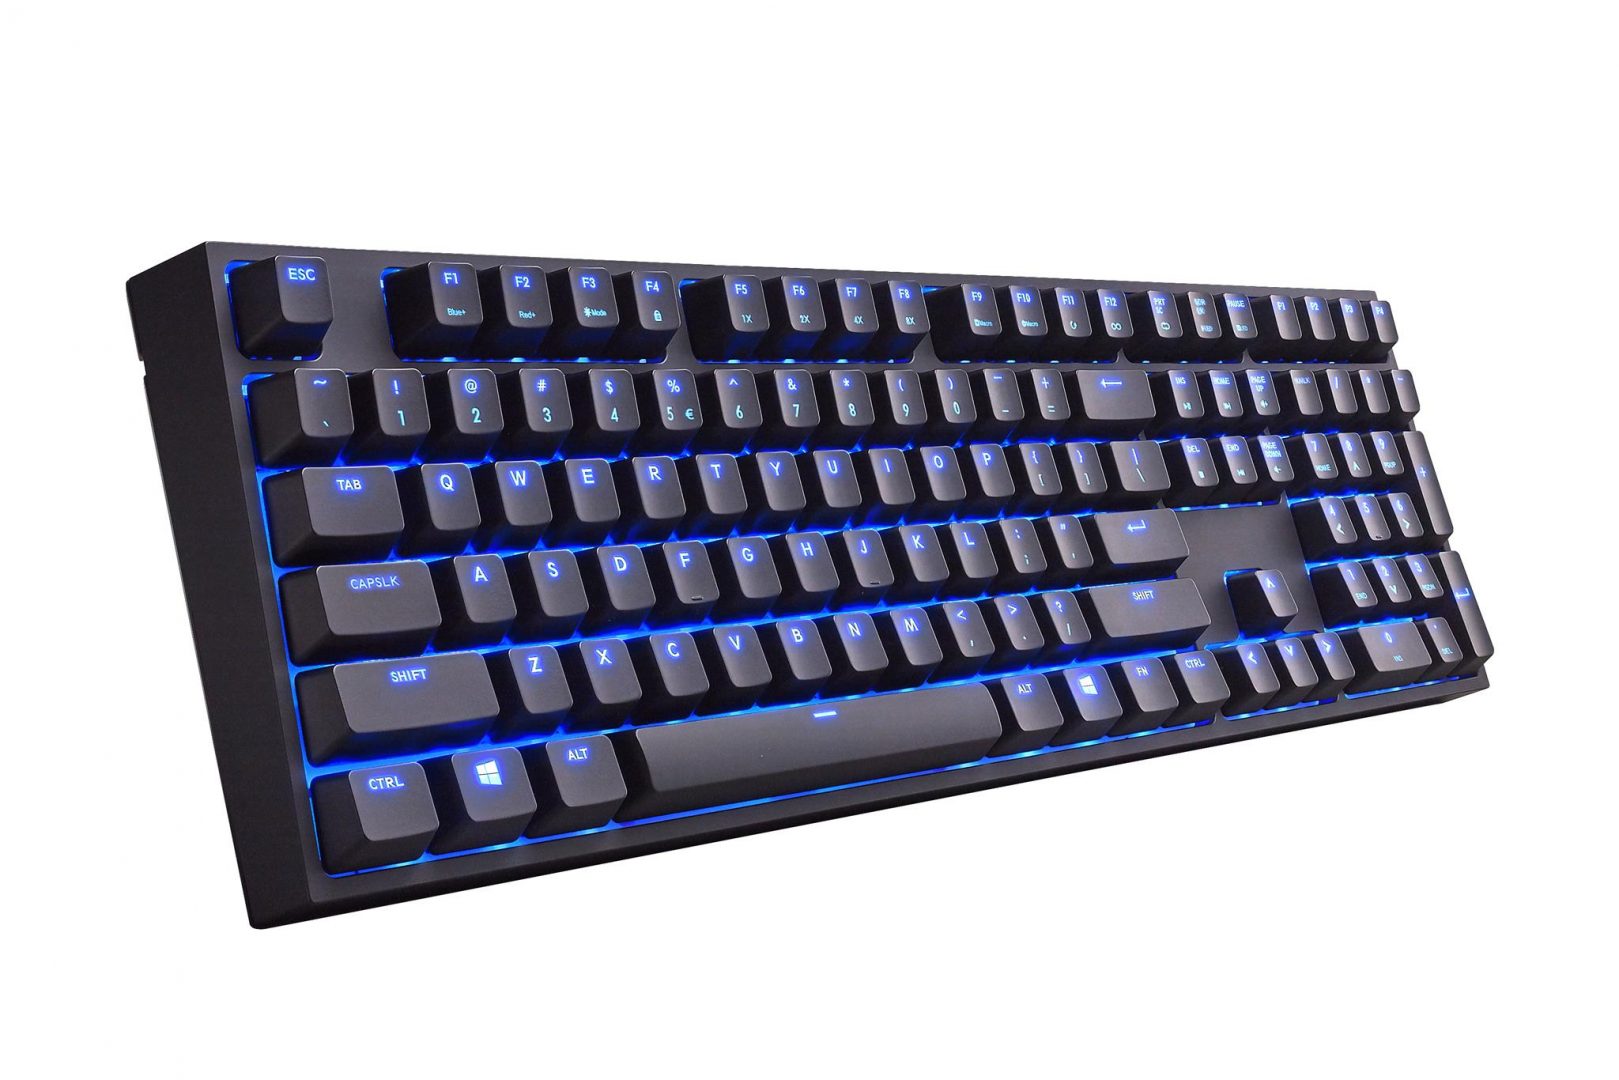 Cooler Master Releases New Quickfire XTI Mechanical Gaming Keyboard